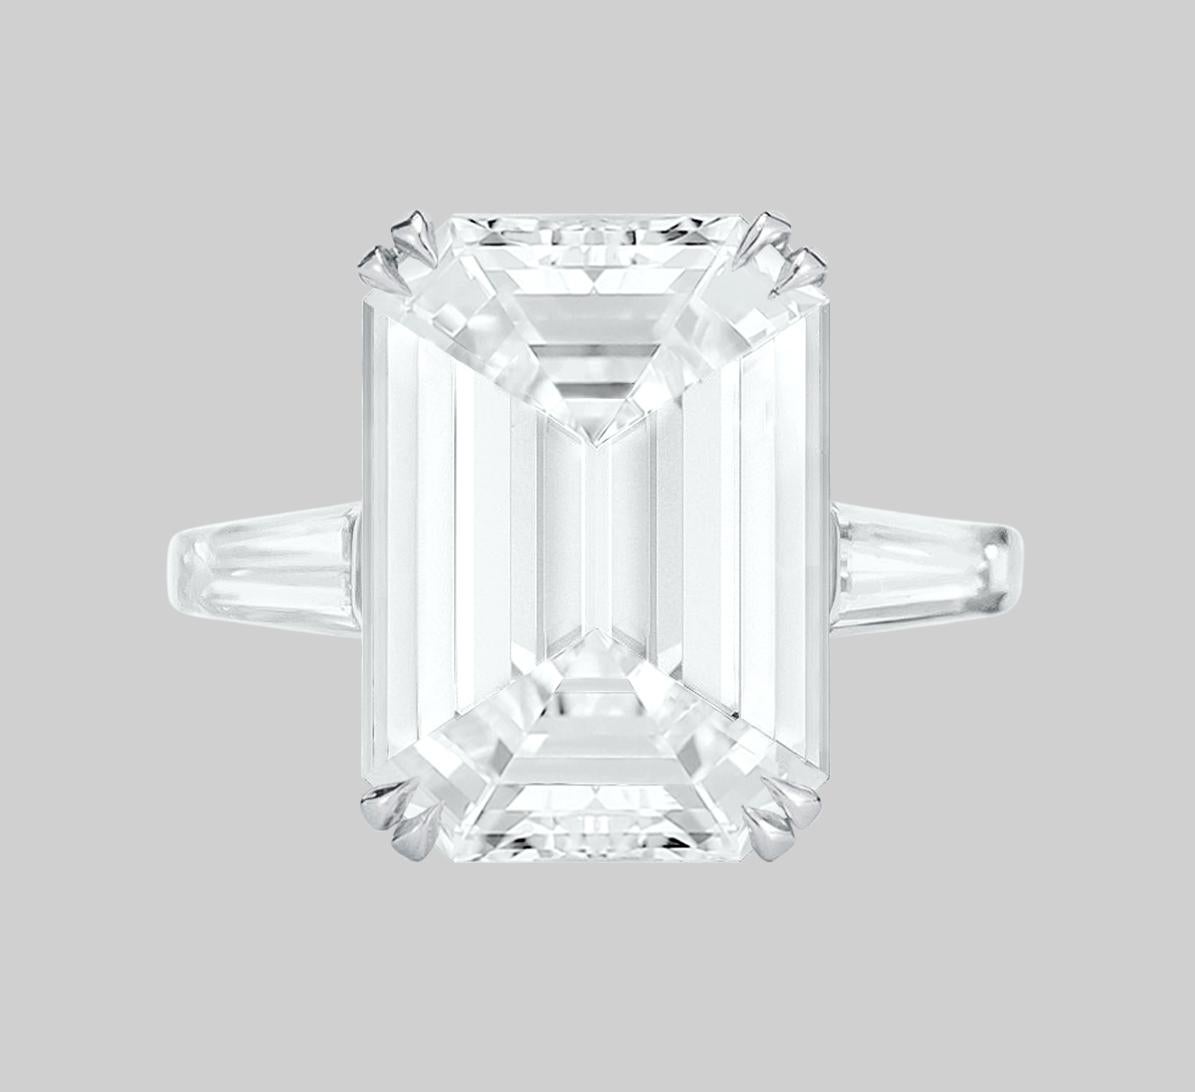 An exquisite 15 carat flawless emerald cut diamond with two tapered baguette diamonds
color is D
clarity is Internally Flawless
Excellent polish
Excelelnt symmetry
None Fluorescence 
18.07 mm!